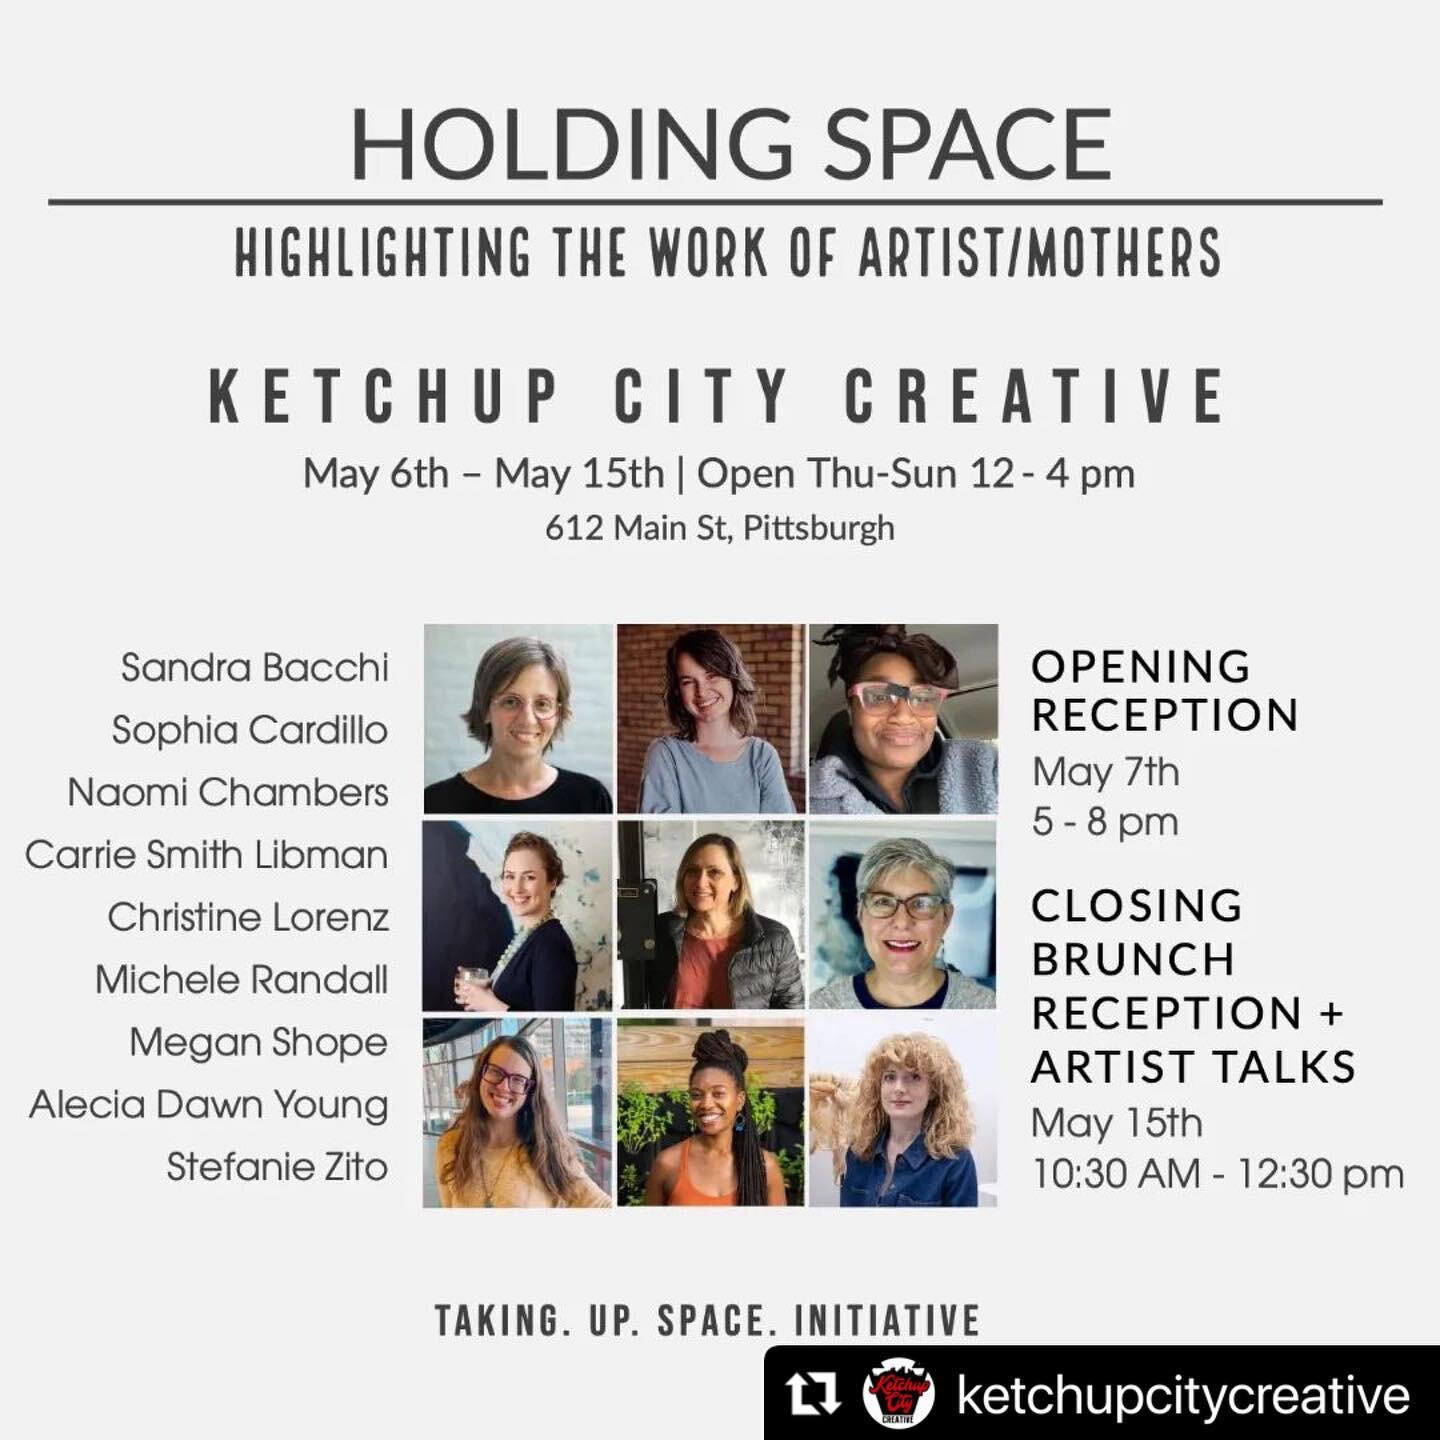 #Repost @ketchupcitycreative with @make_repost
・・・
HOLDING SPACE - highlighting the work of artist/mothers. May 7-15. Please make time to see this show! ❤️